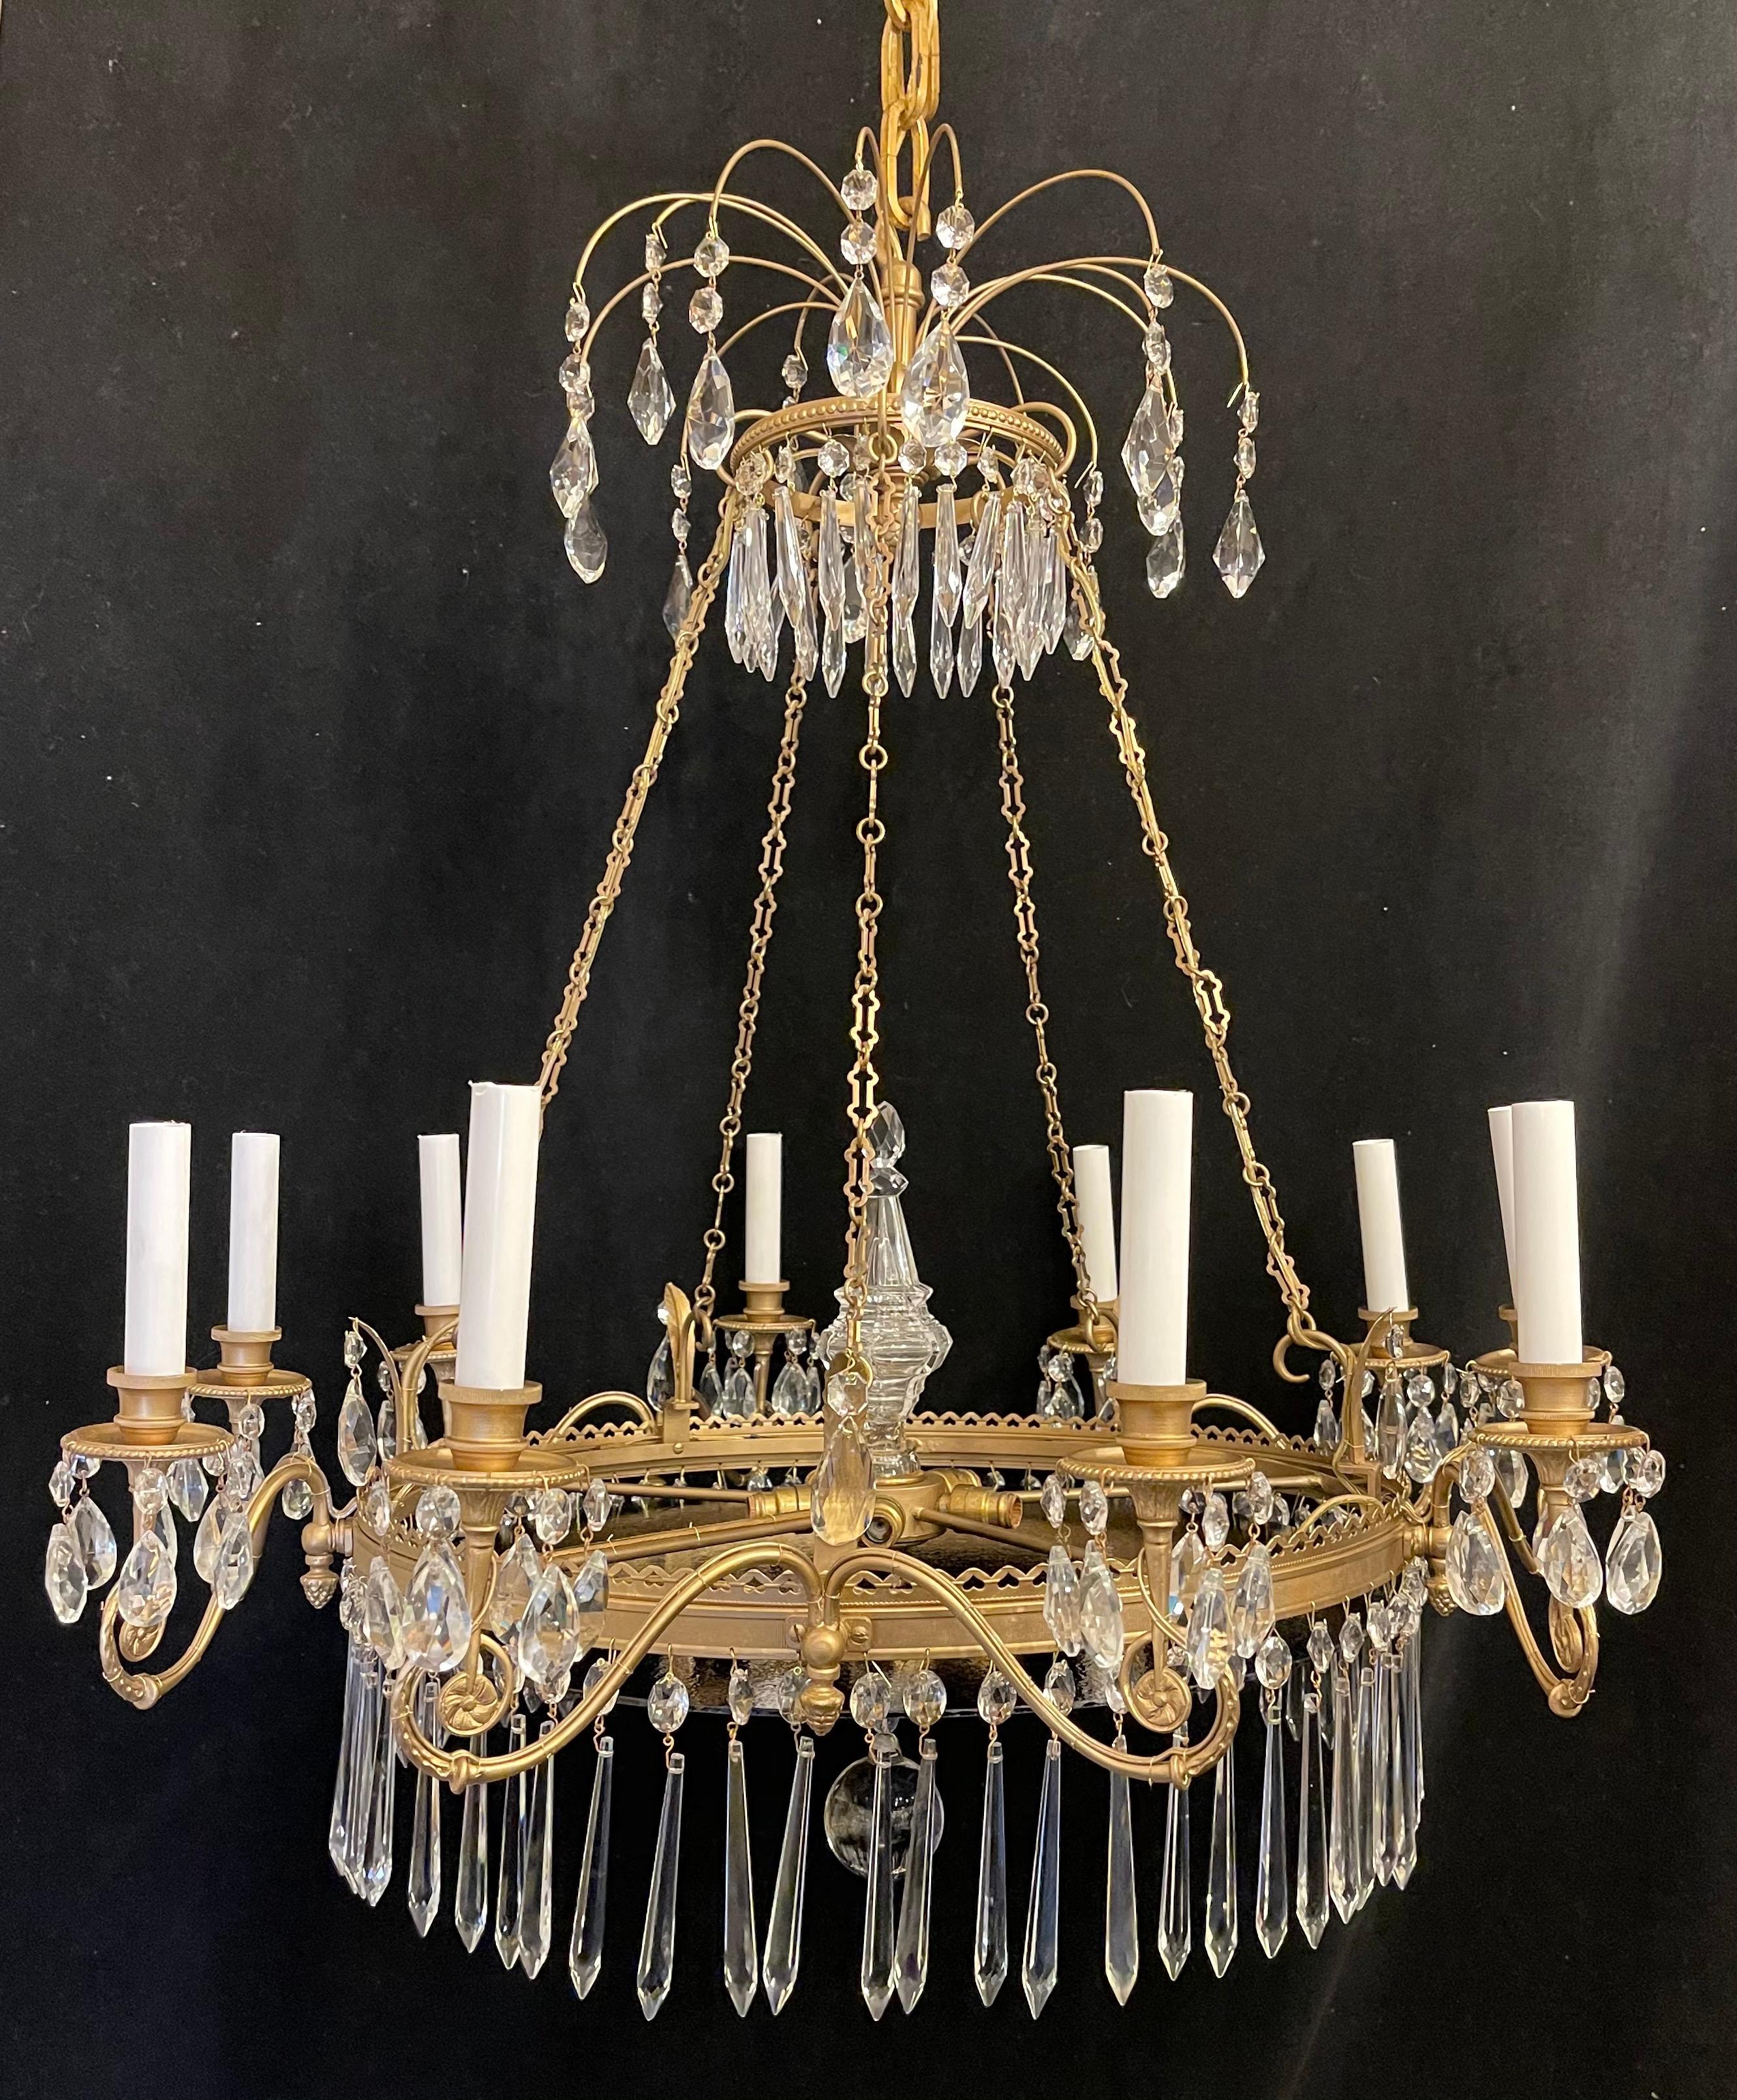 A wonderful French empire / neoclassical doré bronze and purple glass center with crystal drops chandelier having 10 exterior and 5 interior lights, completely rewired and with new sockets

Measures: 36